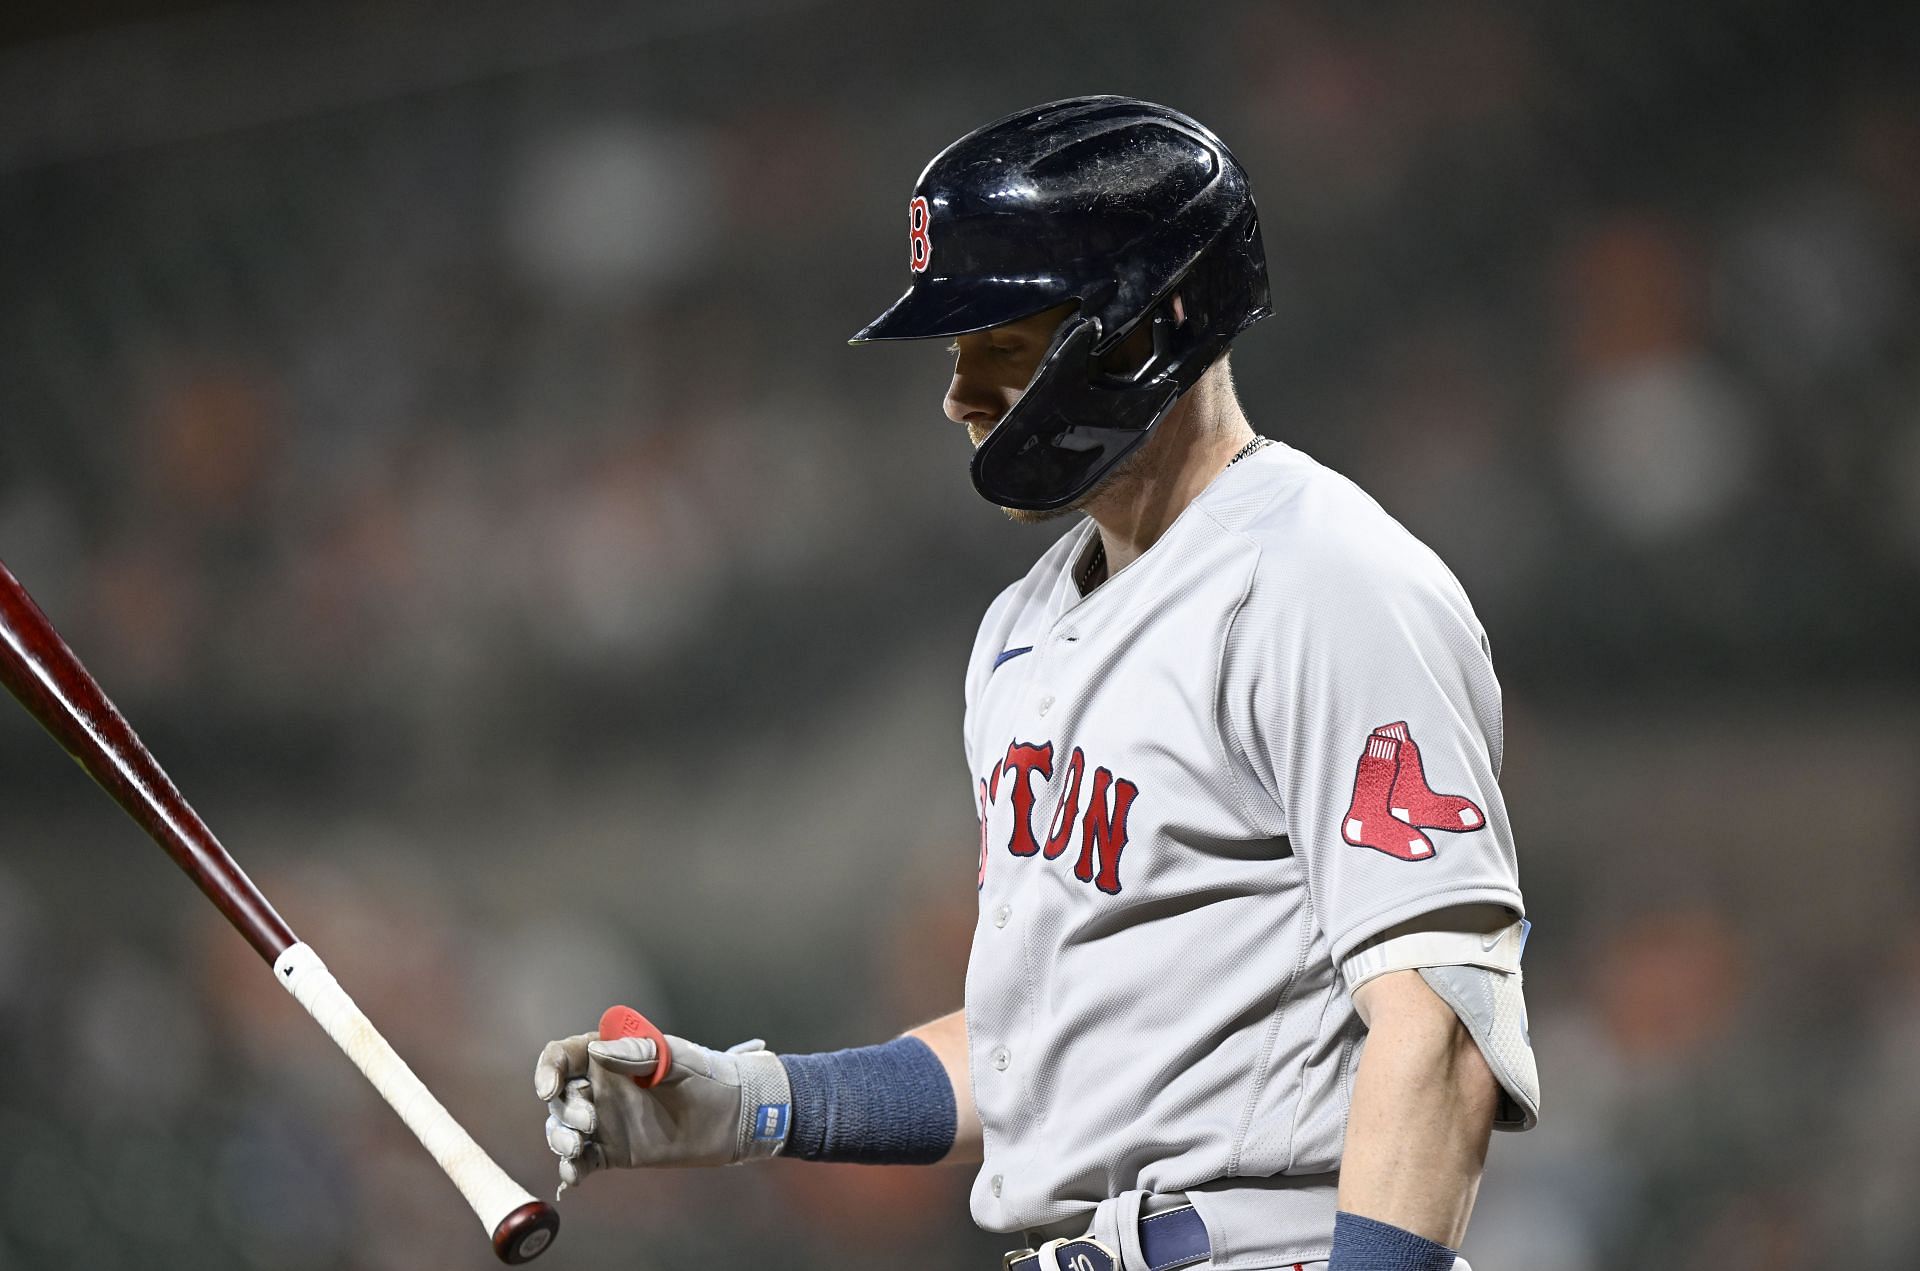 Trevor Story Injury: How long is the Red Sox player expected to be out for?